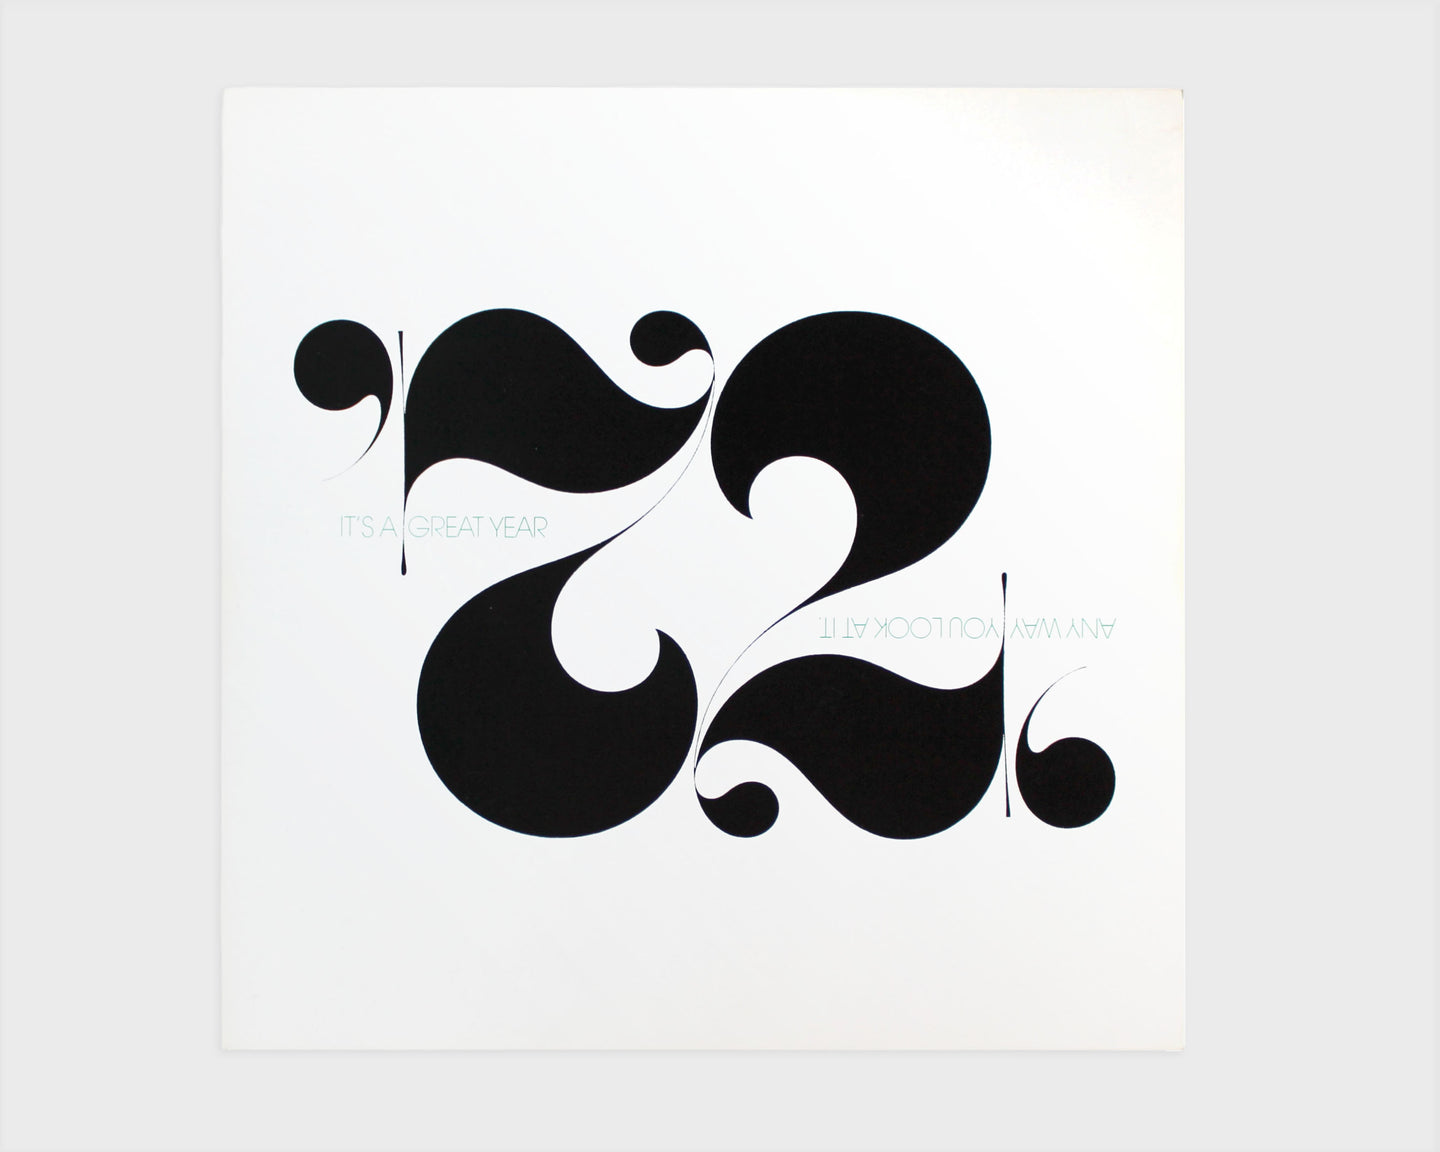 ’72 It's a Great Year Any Way You Look At It [Herb Lubalin and Tom Carnese]